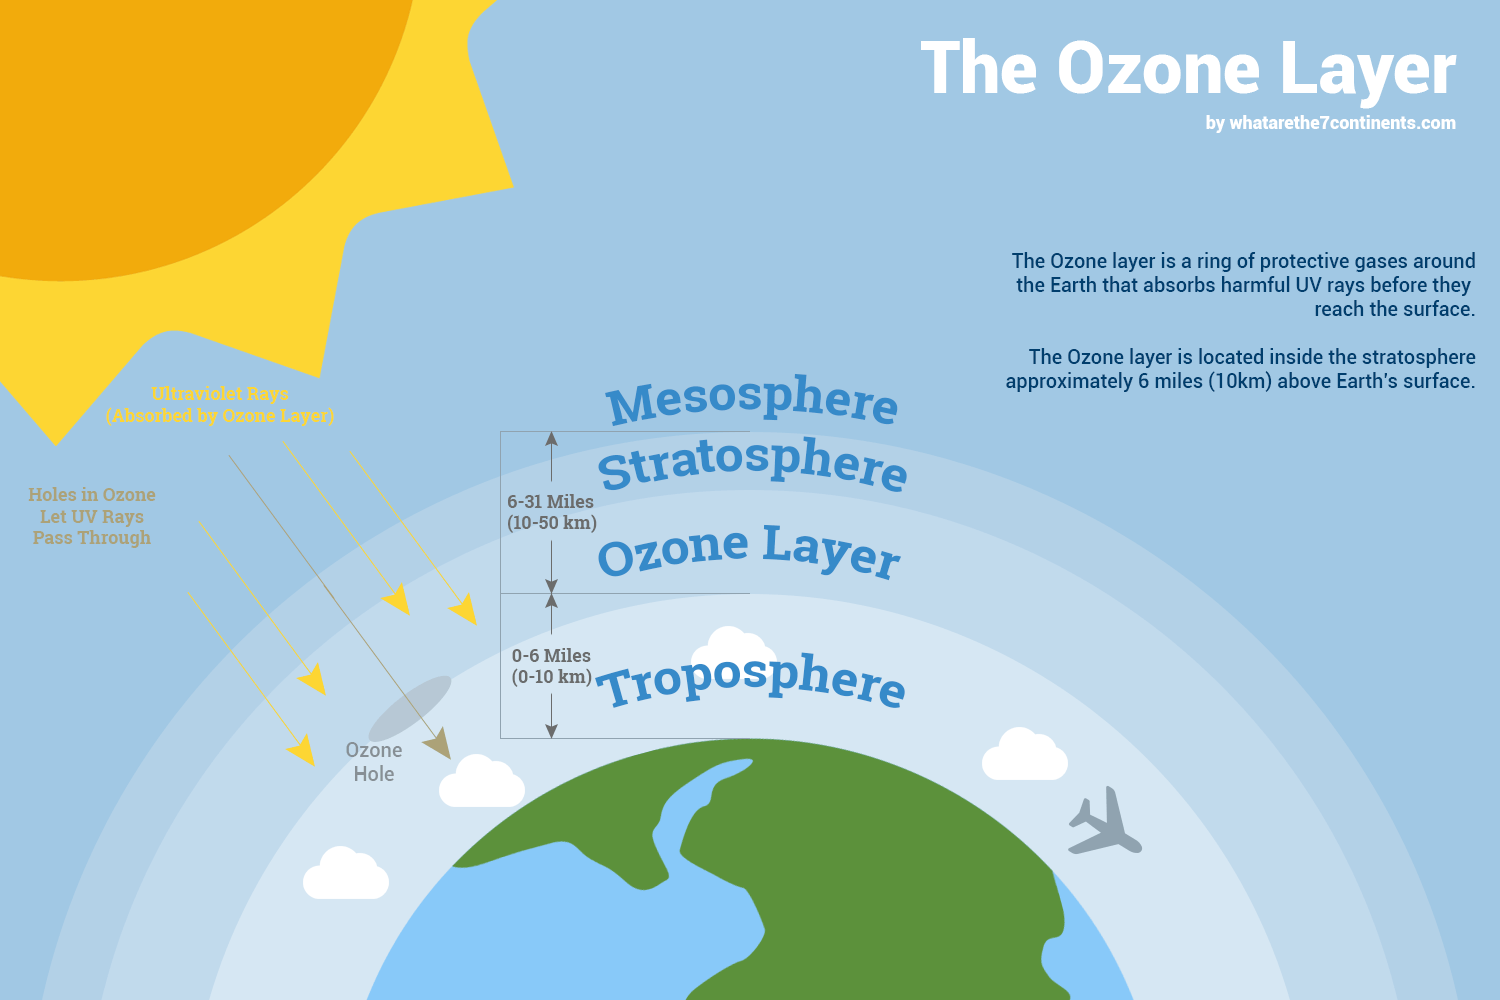 A diagram shows the Earth, sun and the layers of the upper atmosphere, above the clouds: troposphere, ozone layer, stratosphere, mesosphere.